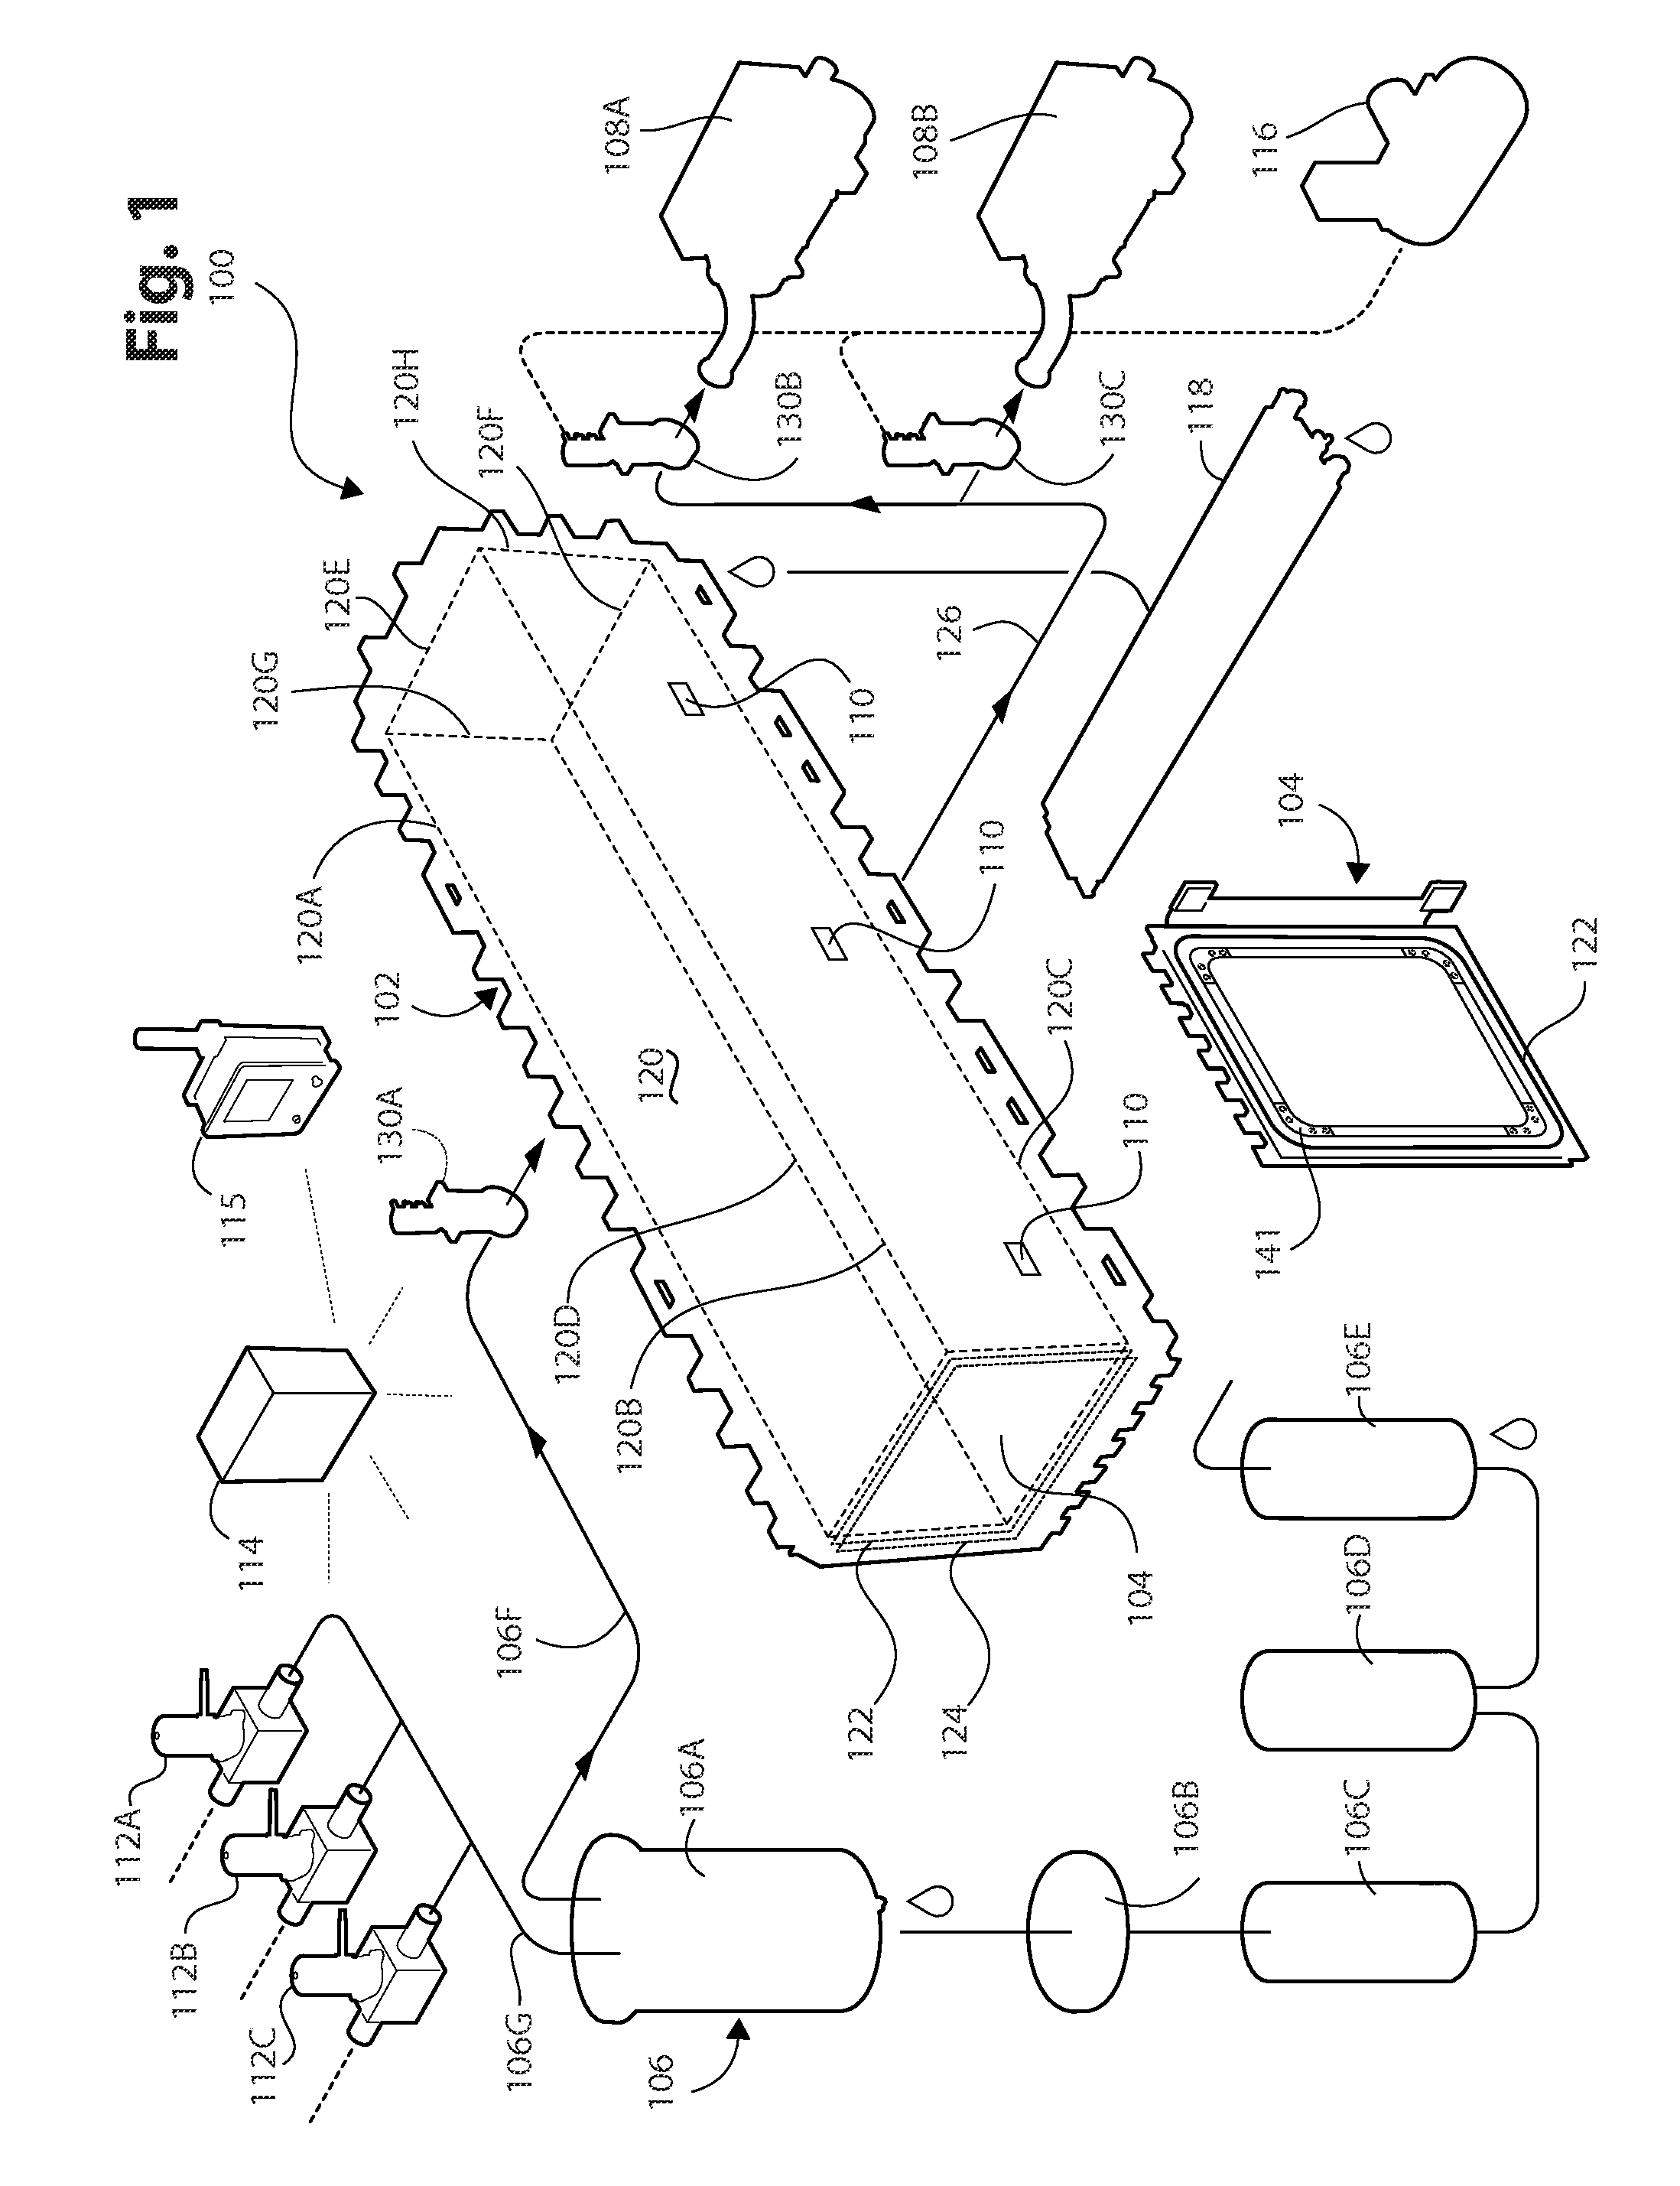 Systems and methods for controlled pervaporation in horticultural cellular tissue